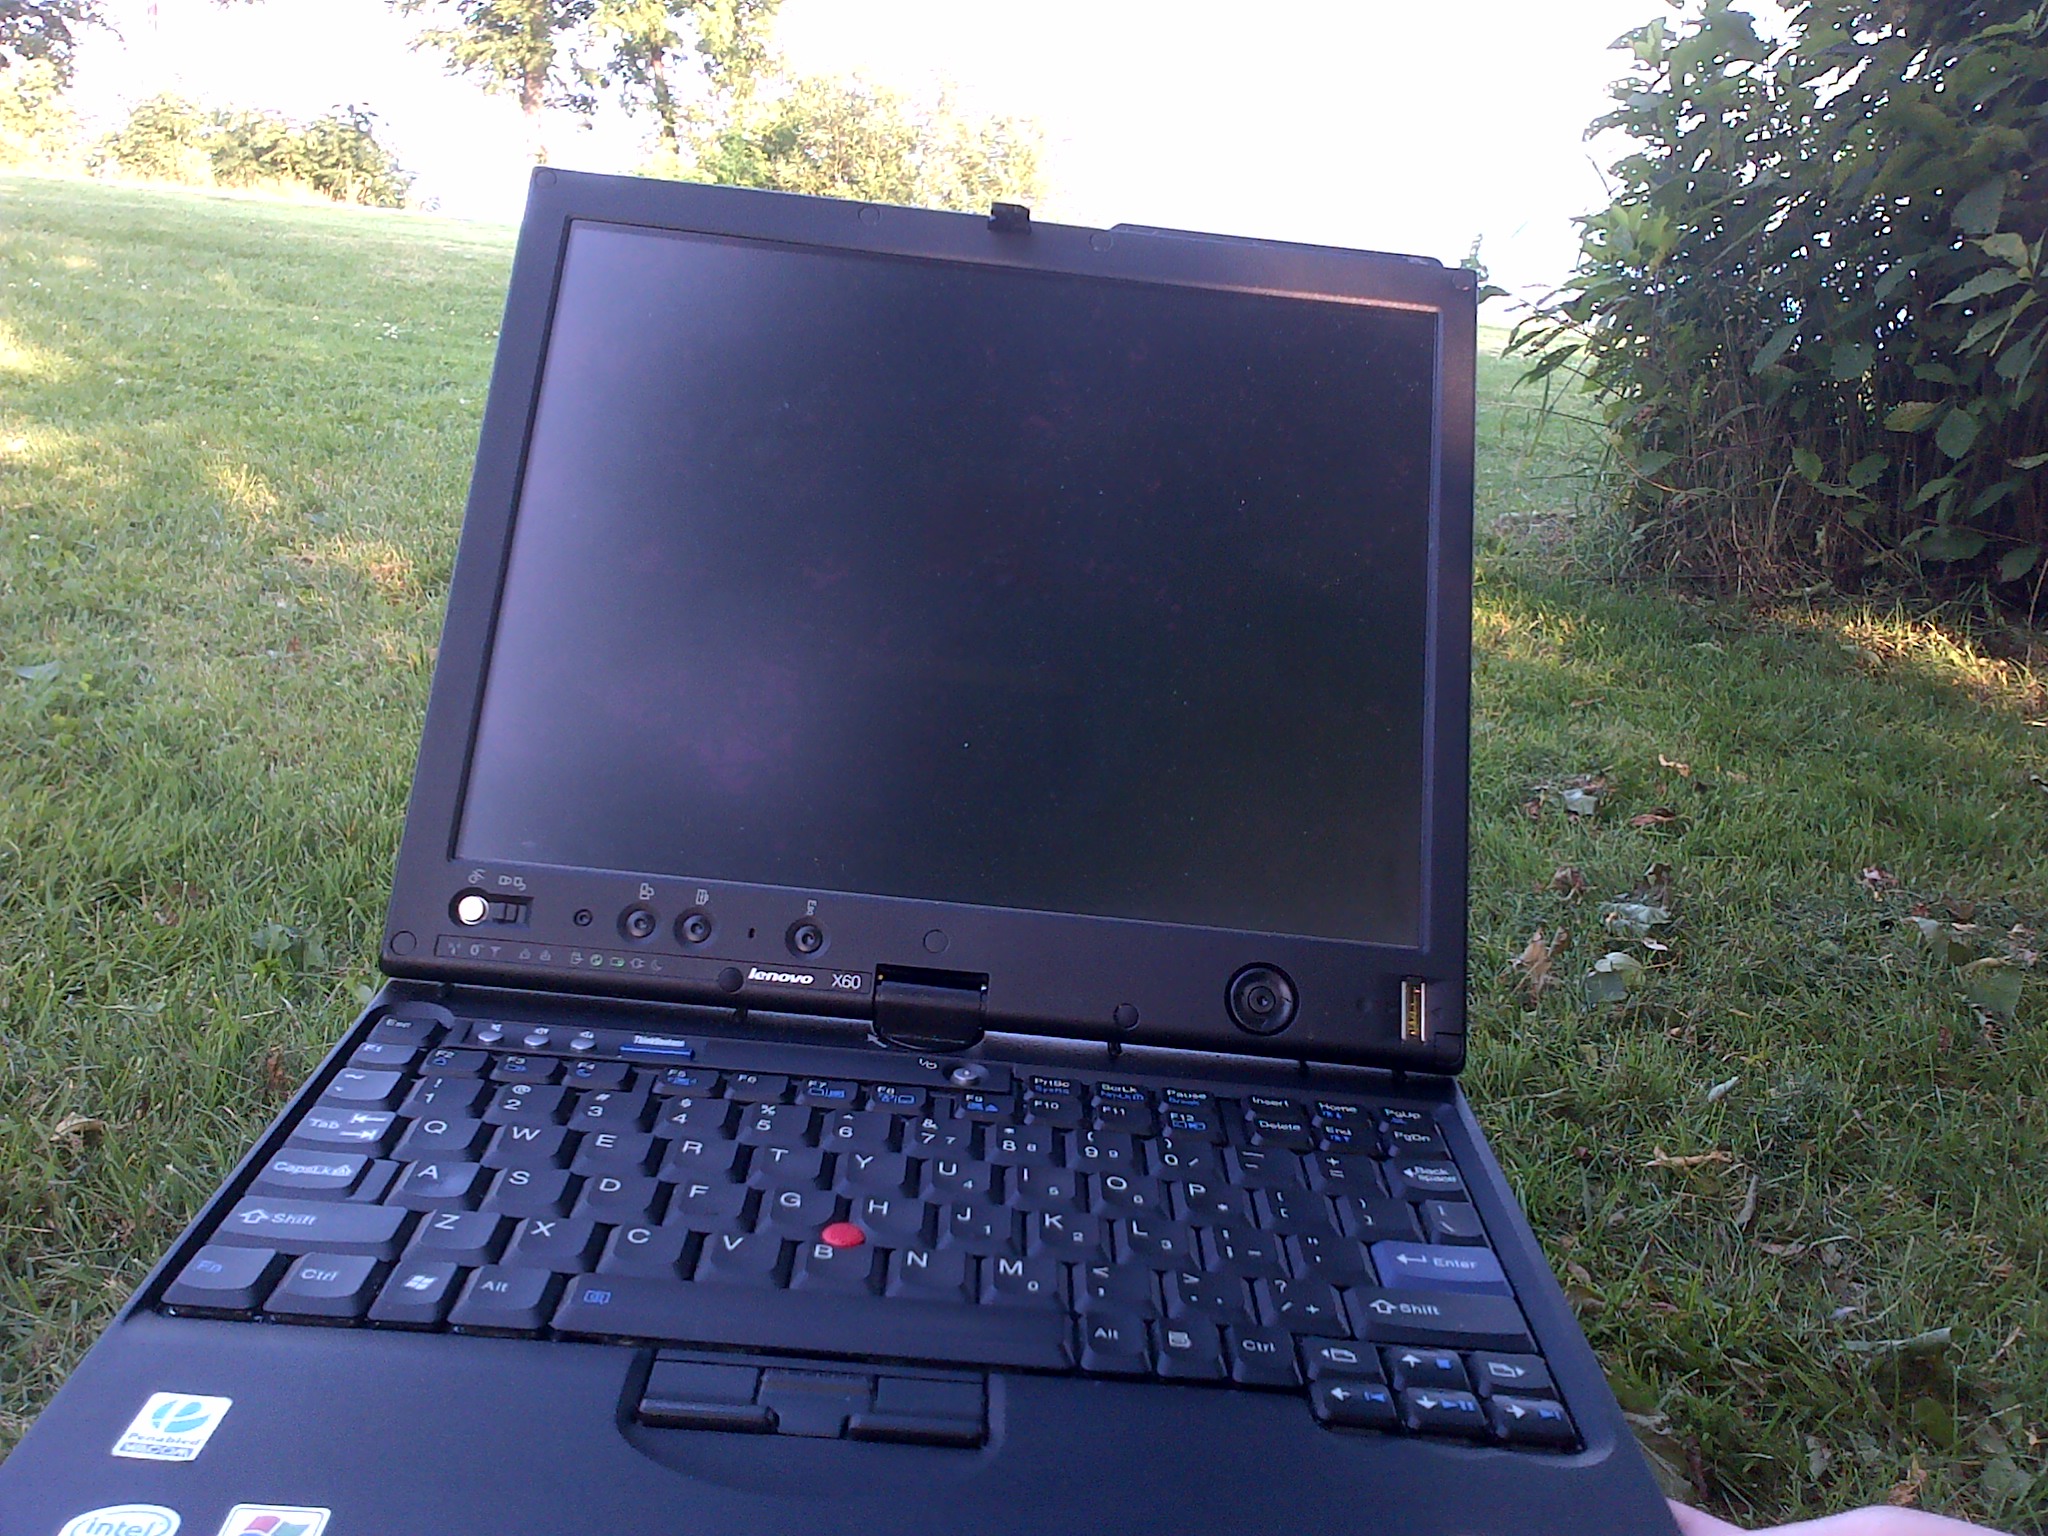 With my ThinkPad X60 in the park, my "office" today.